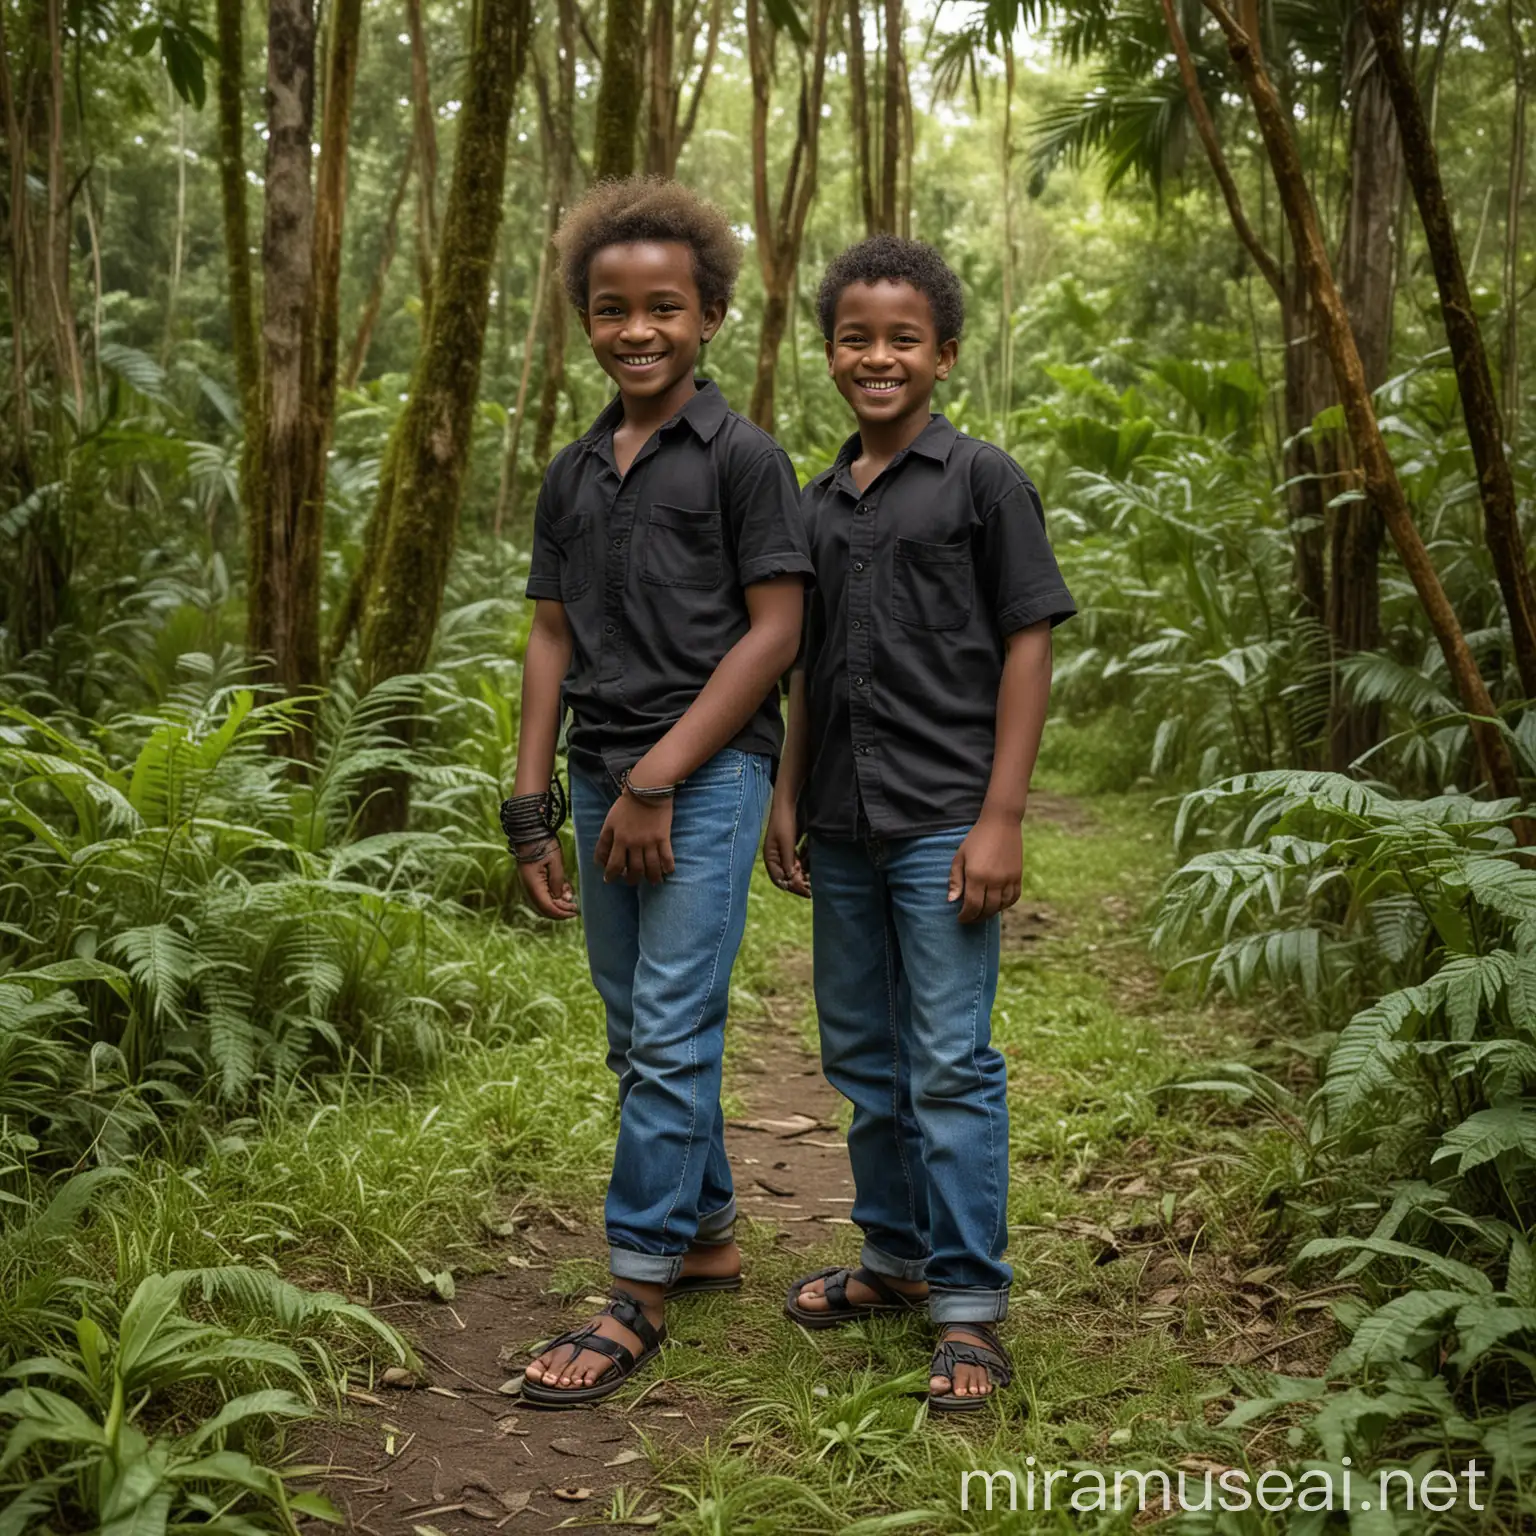 AfroPapuan Youth Befriends Friendly Tiger in Green Forest